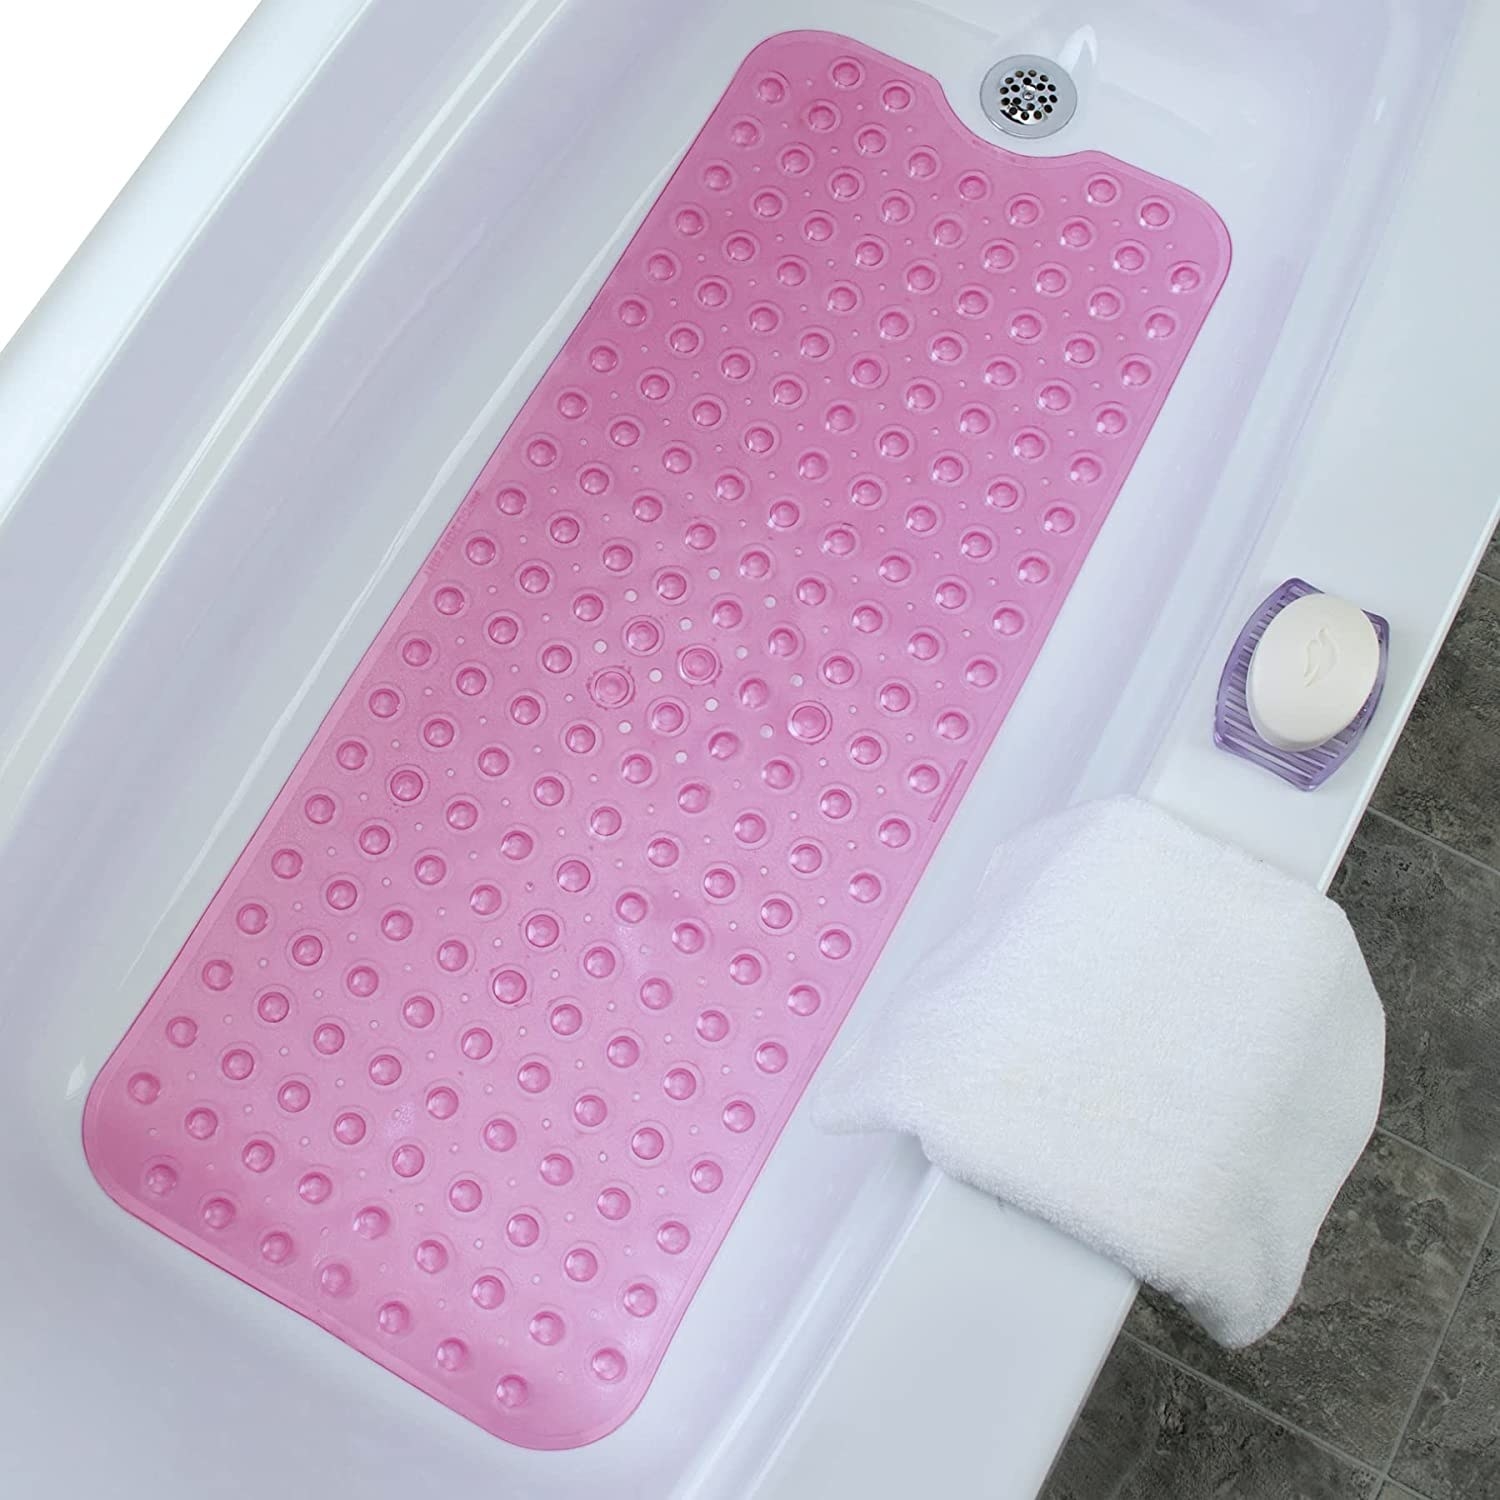 The mat in the bottom of a bathtub